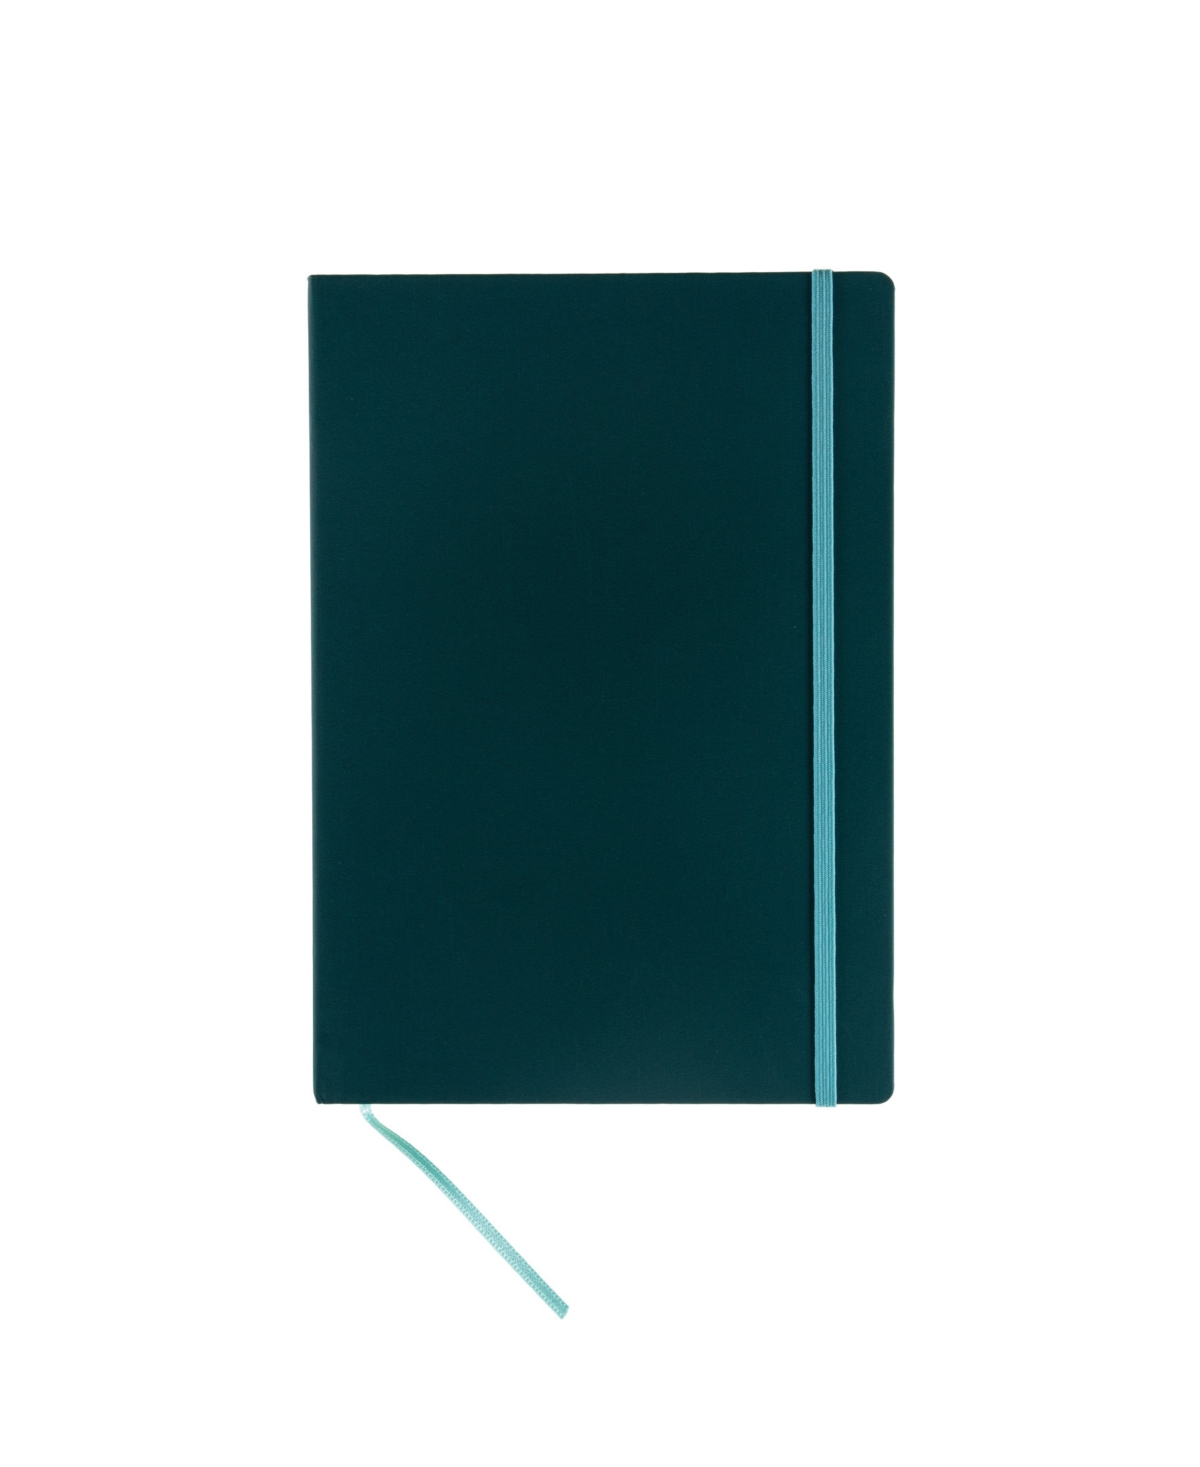 Ispira Hard Cover Dotted A5 Notebook, 5.8" x 8.3" - Green